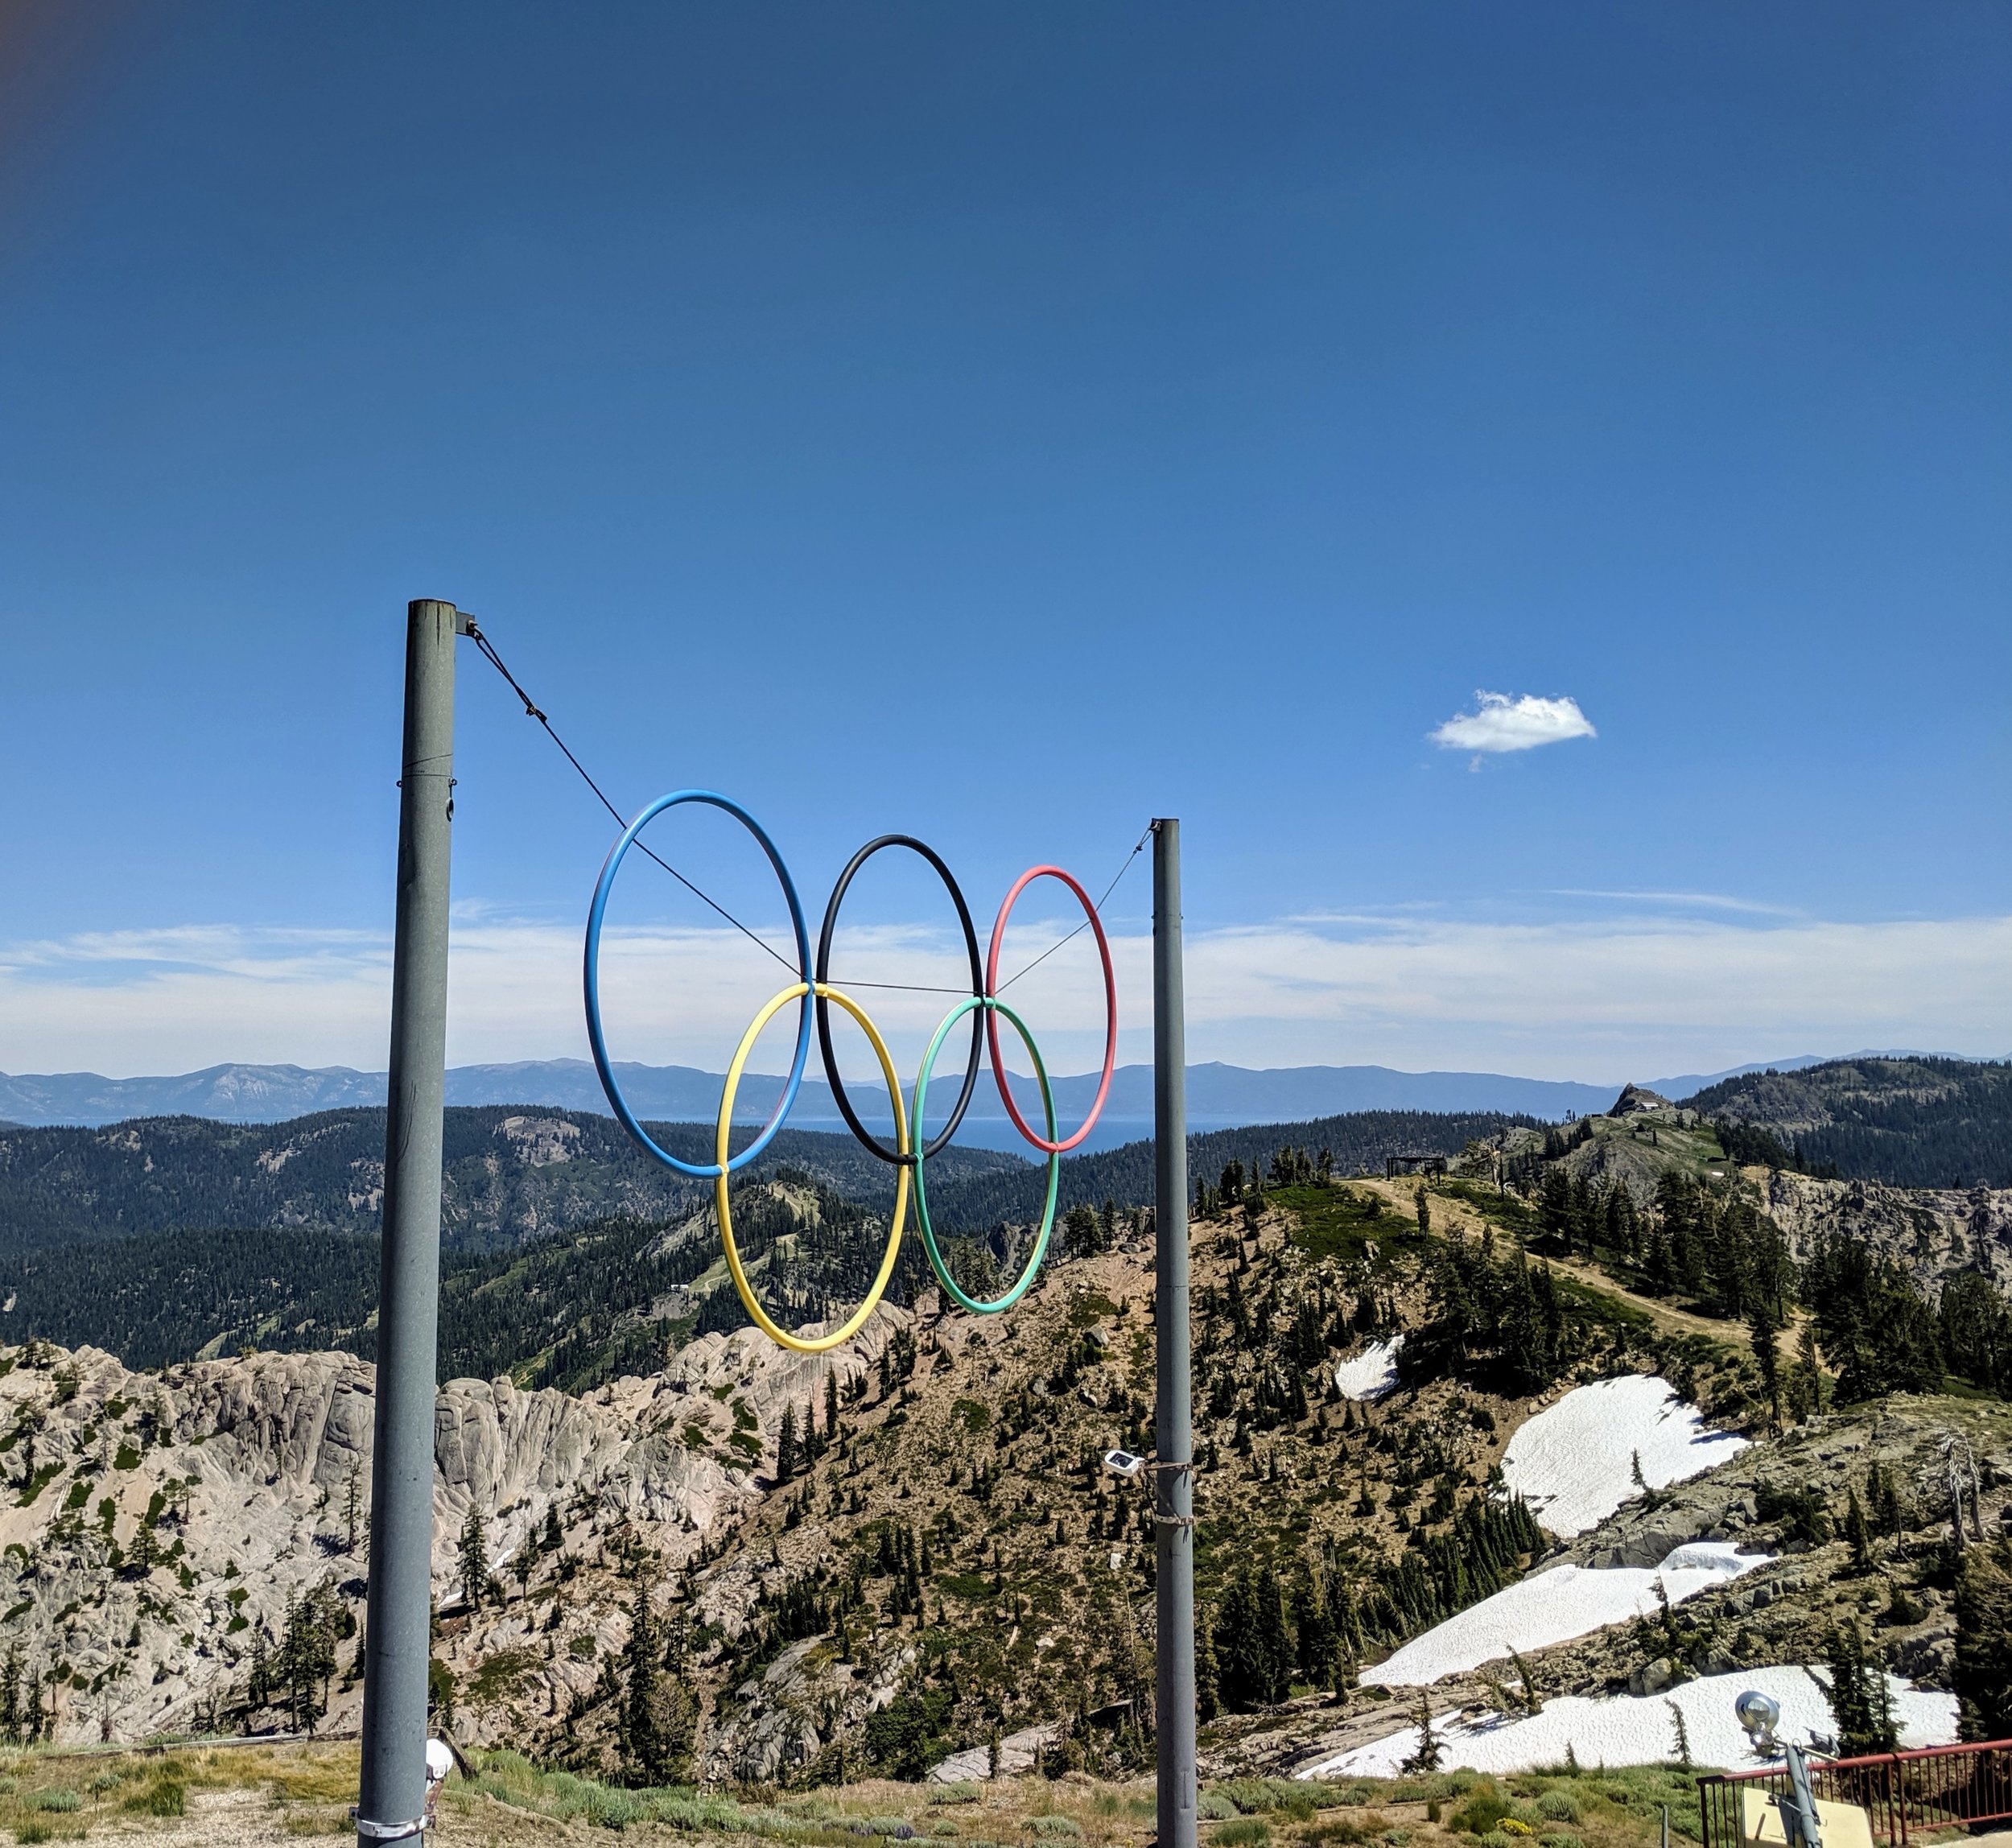  Olympic Rings at Squaw Valley. 